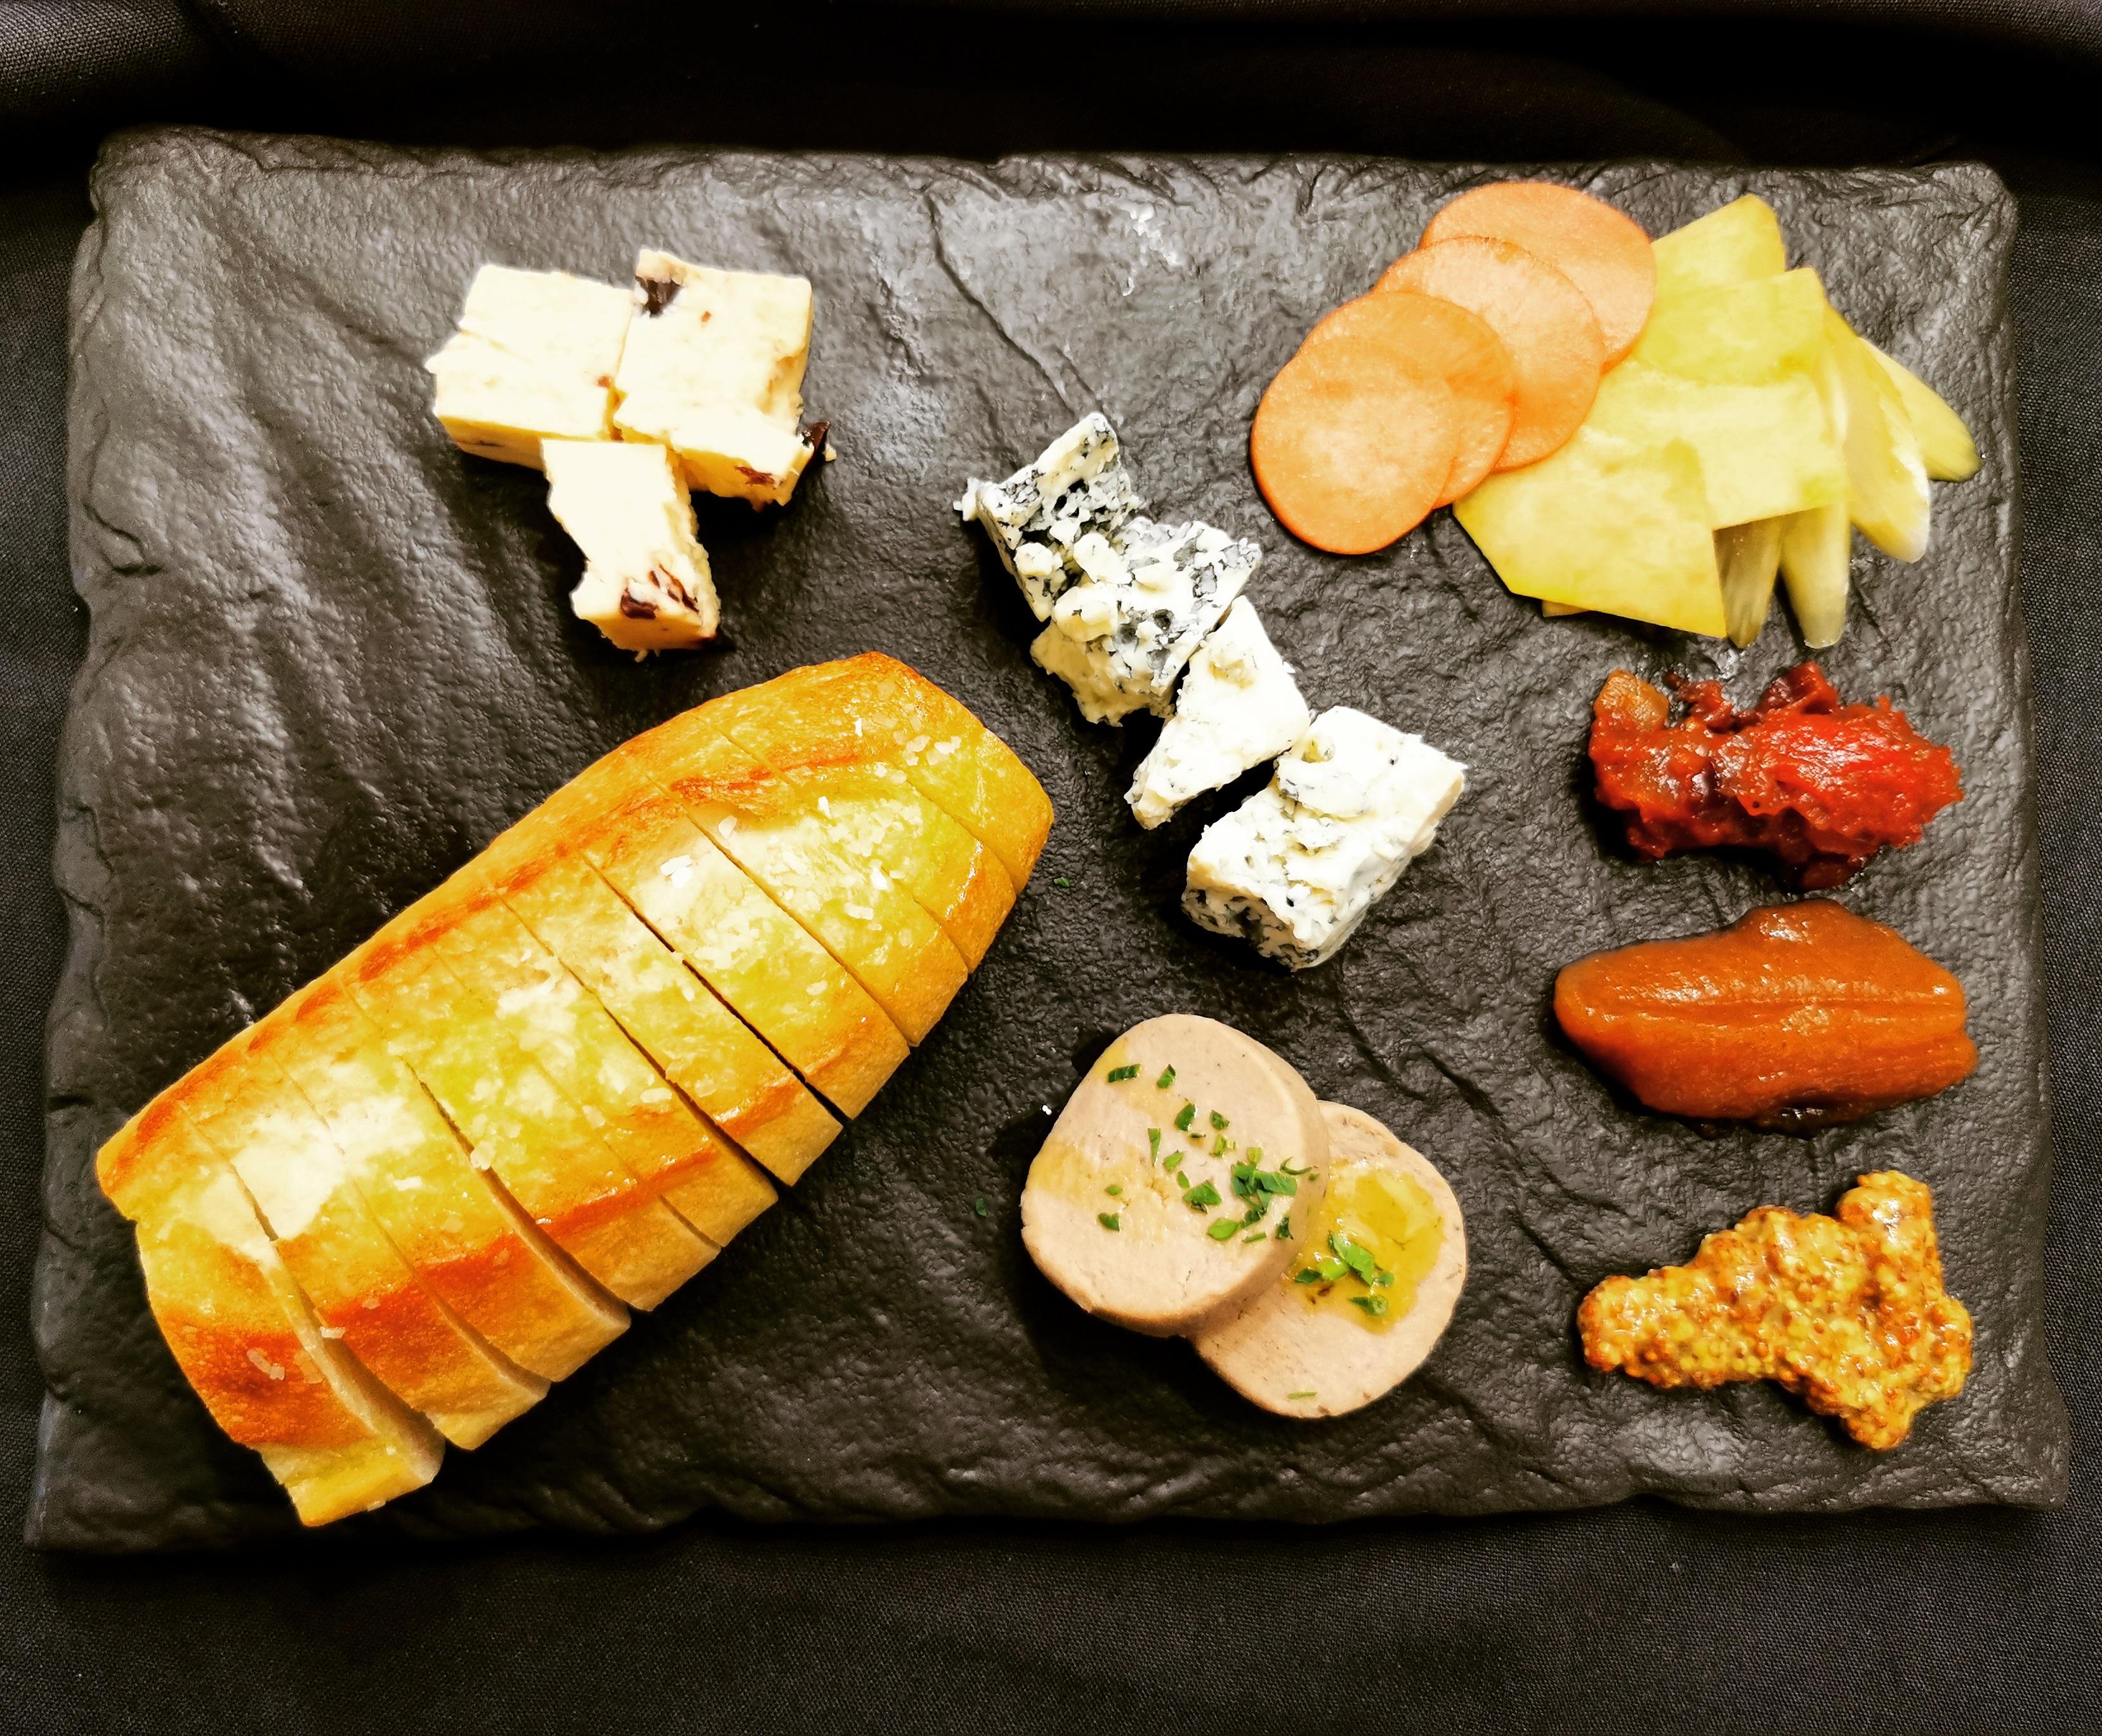 Cheese and Charcuterie Plate (3 meats and cheeses)